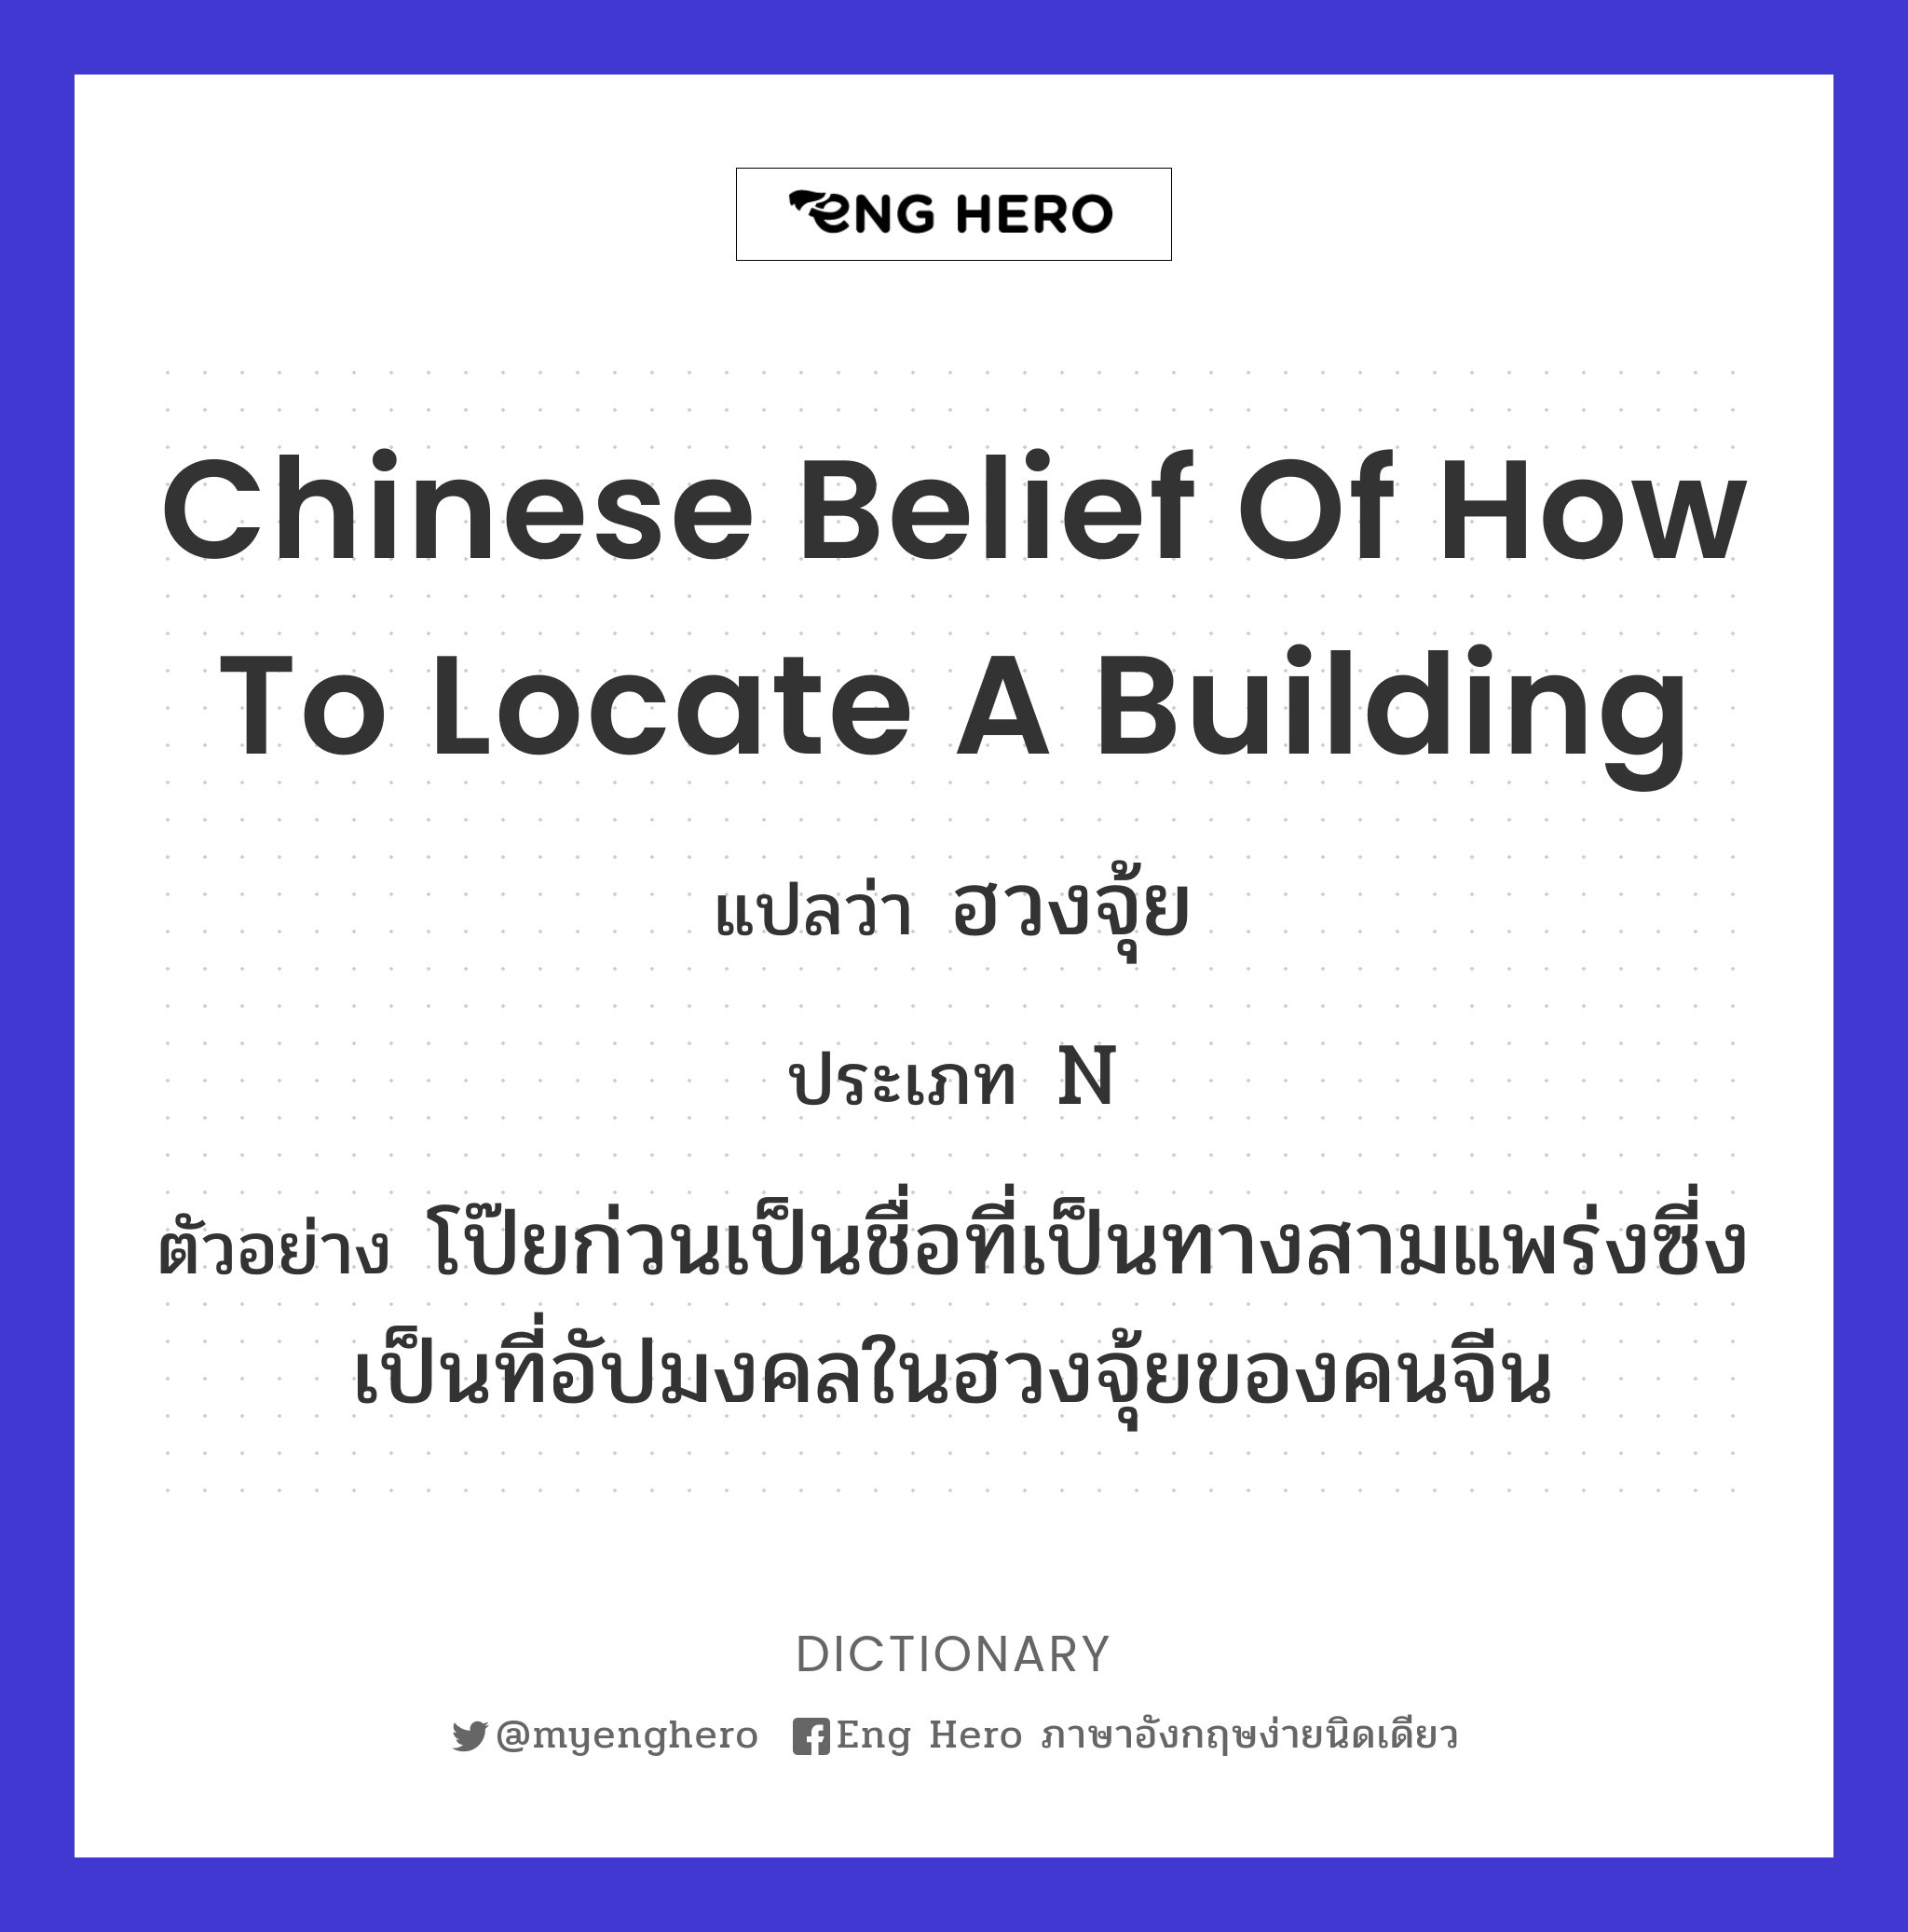 Chinese belief of how to locate a building